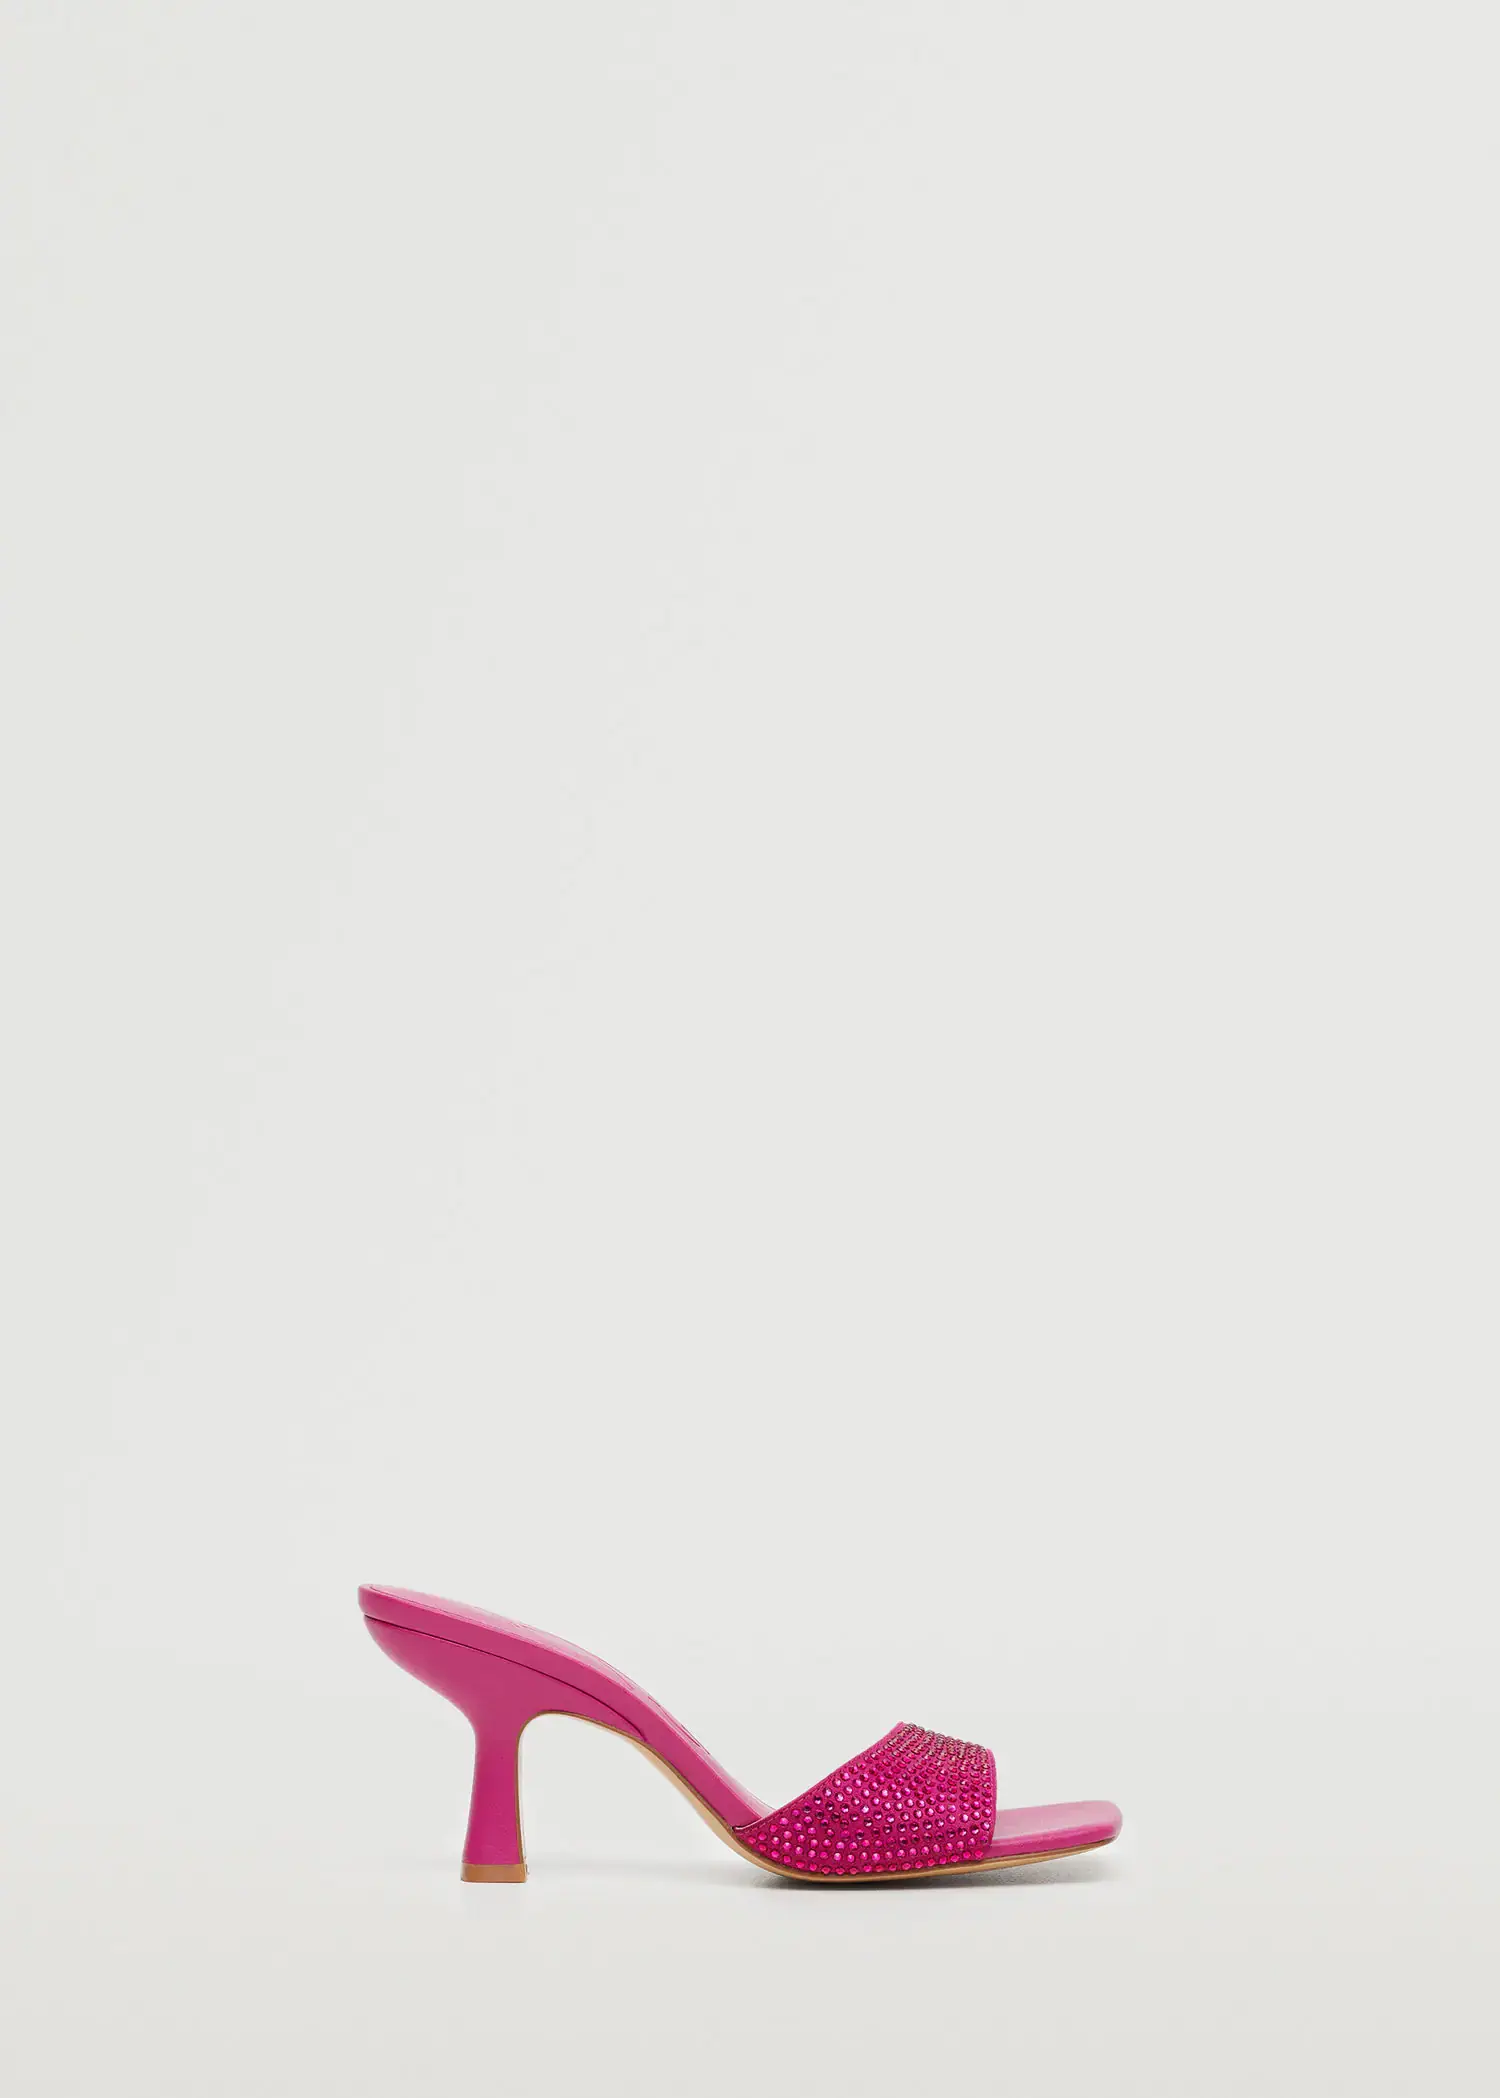 Mango Glitter high-heeled sandals. a pair of pink high heeled shoes sitting on top of a table. 